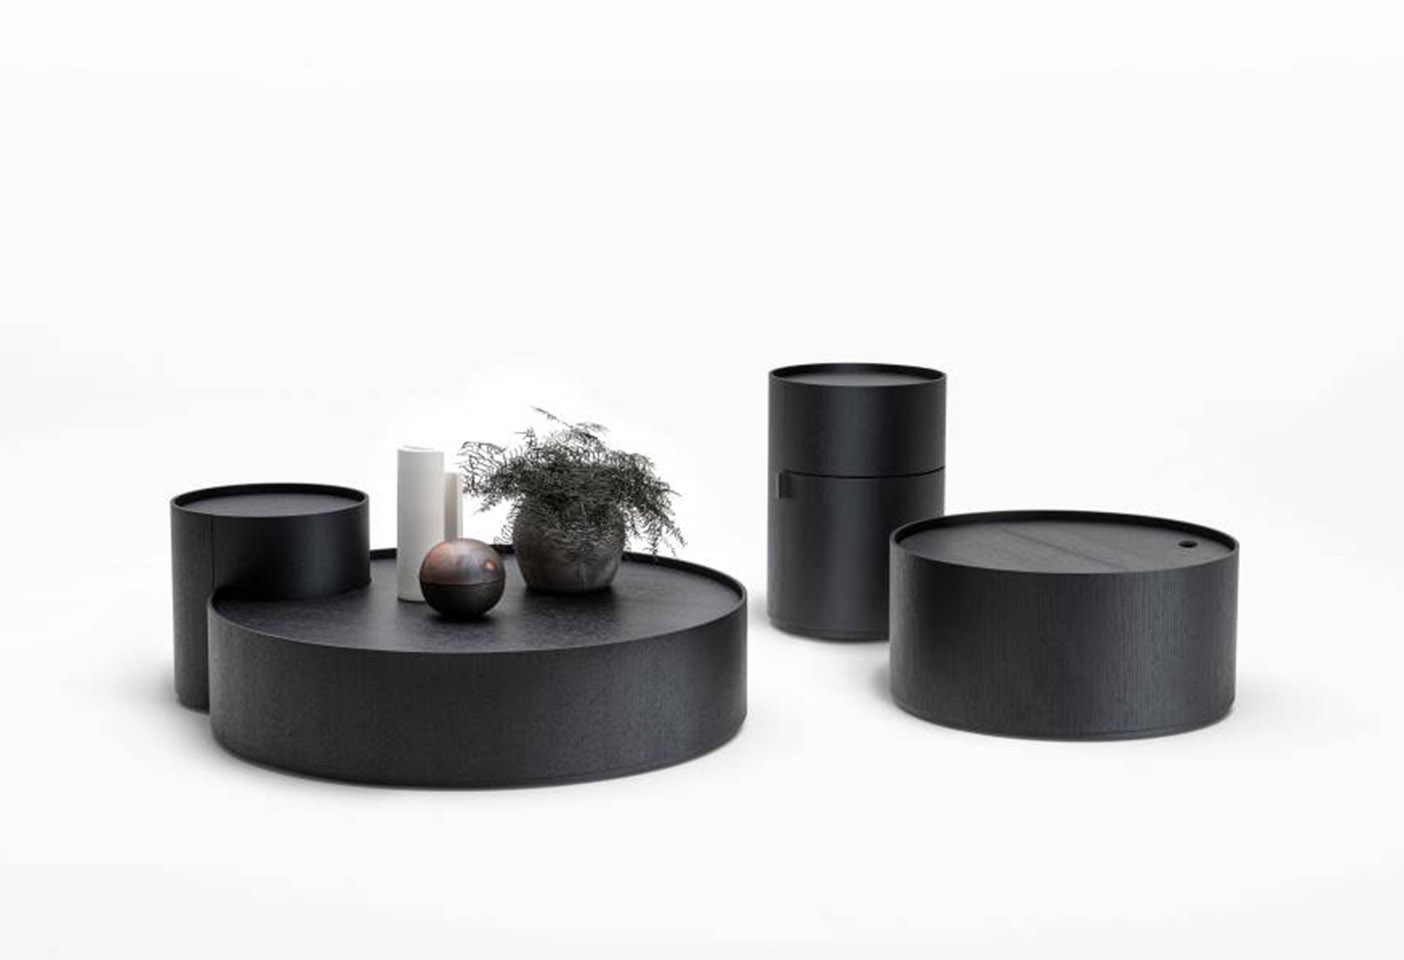 The additons to Mist-O's Moon collection for Living Divani include Moon Eclipse (left), Moon Satellite (centre) and Full Moon, a range of clever storage vessels. Photos c/o Living Divani. 